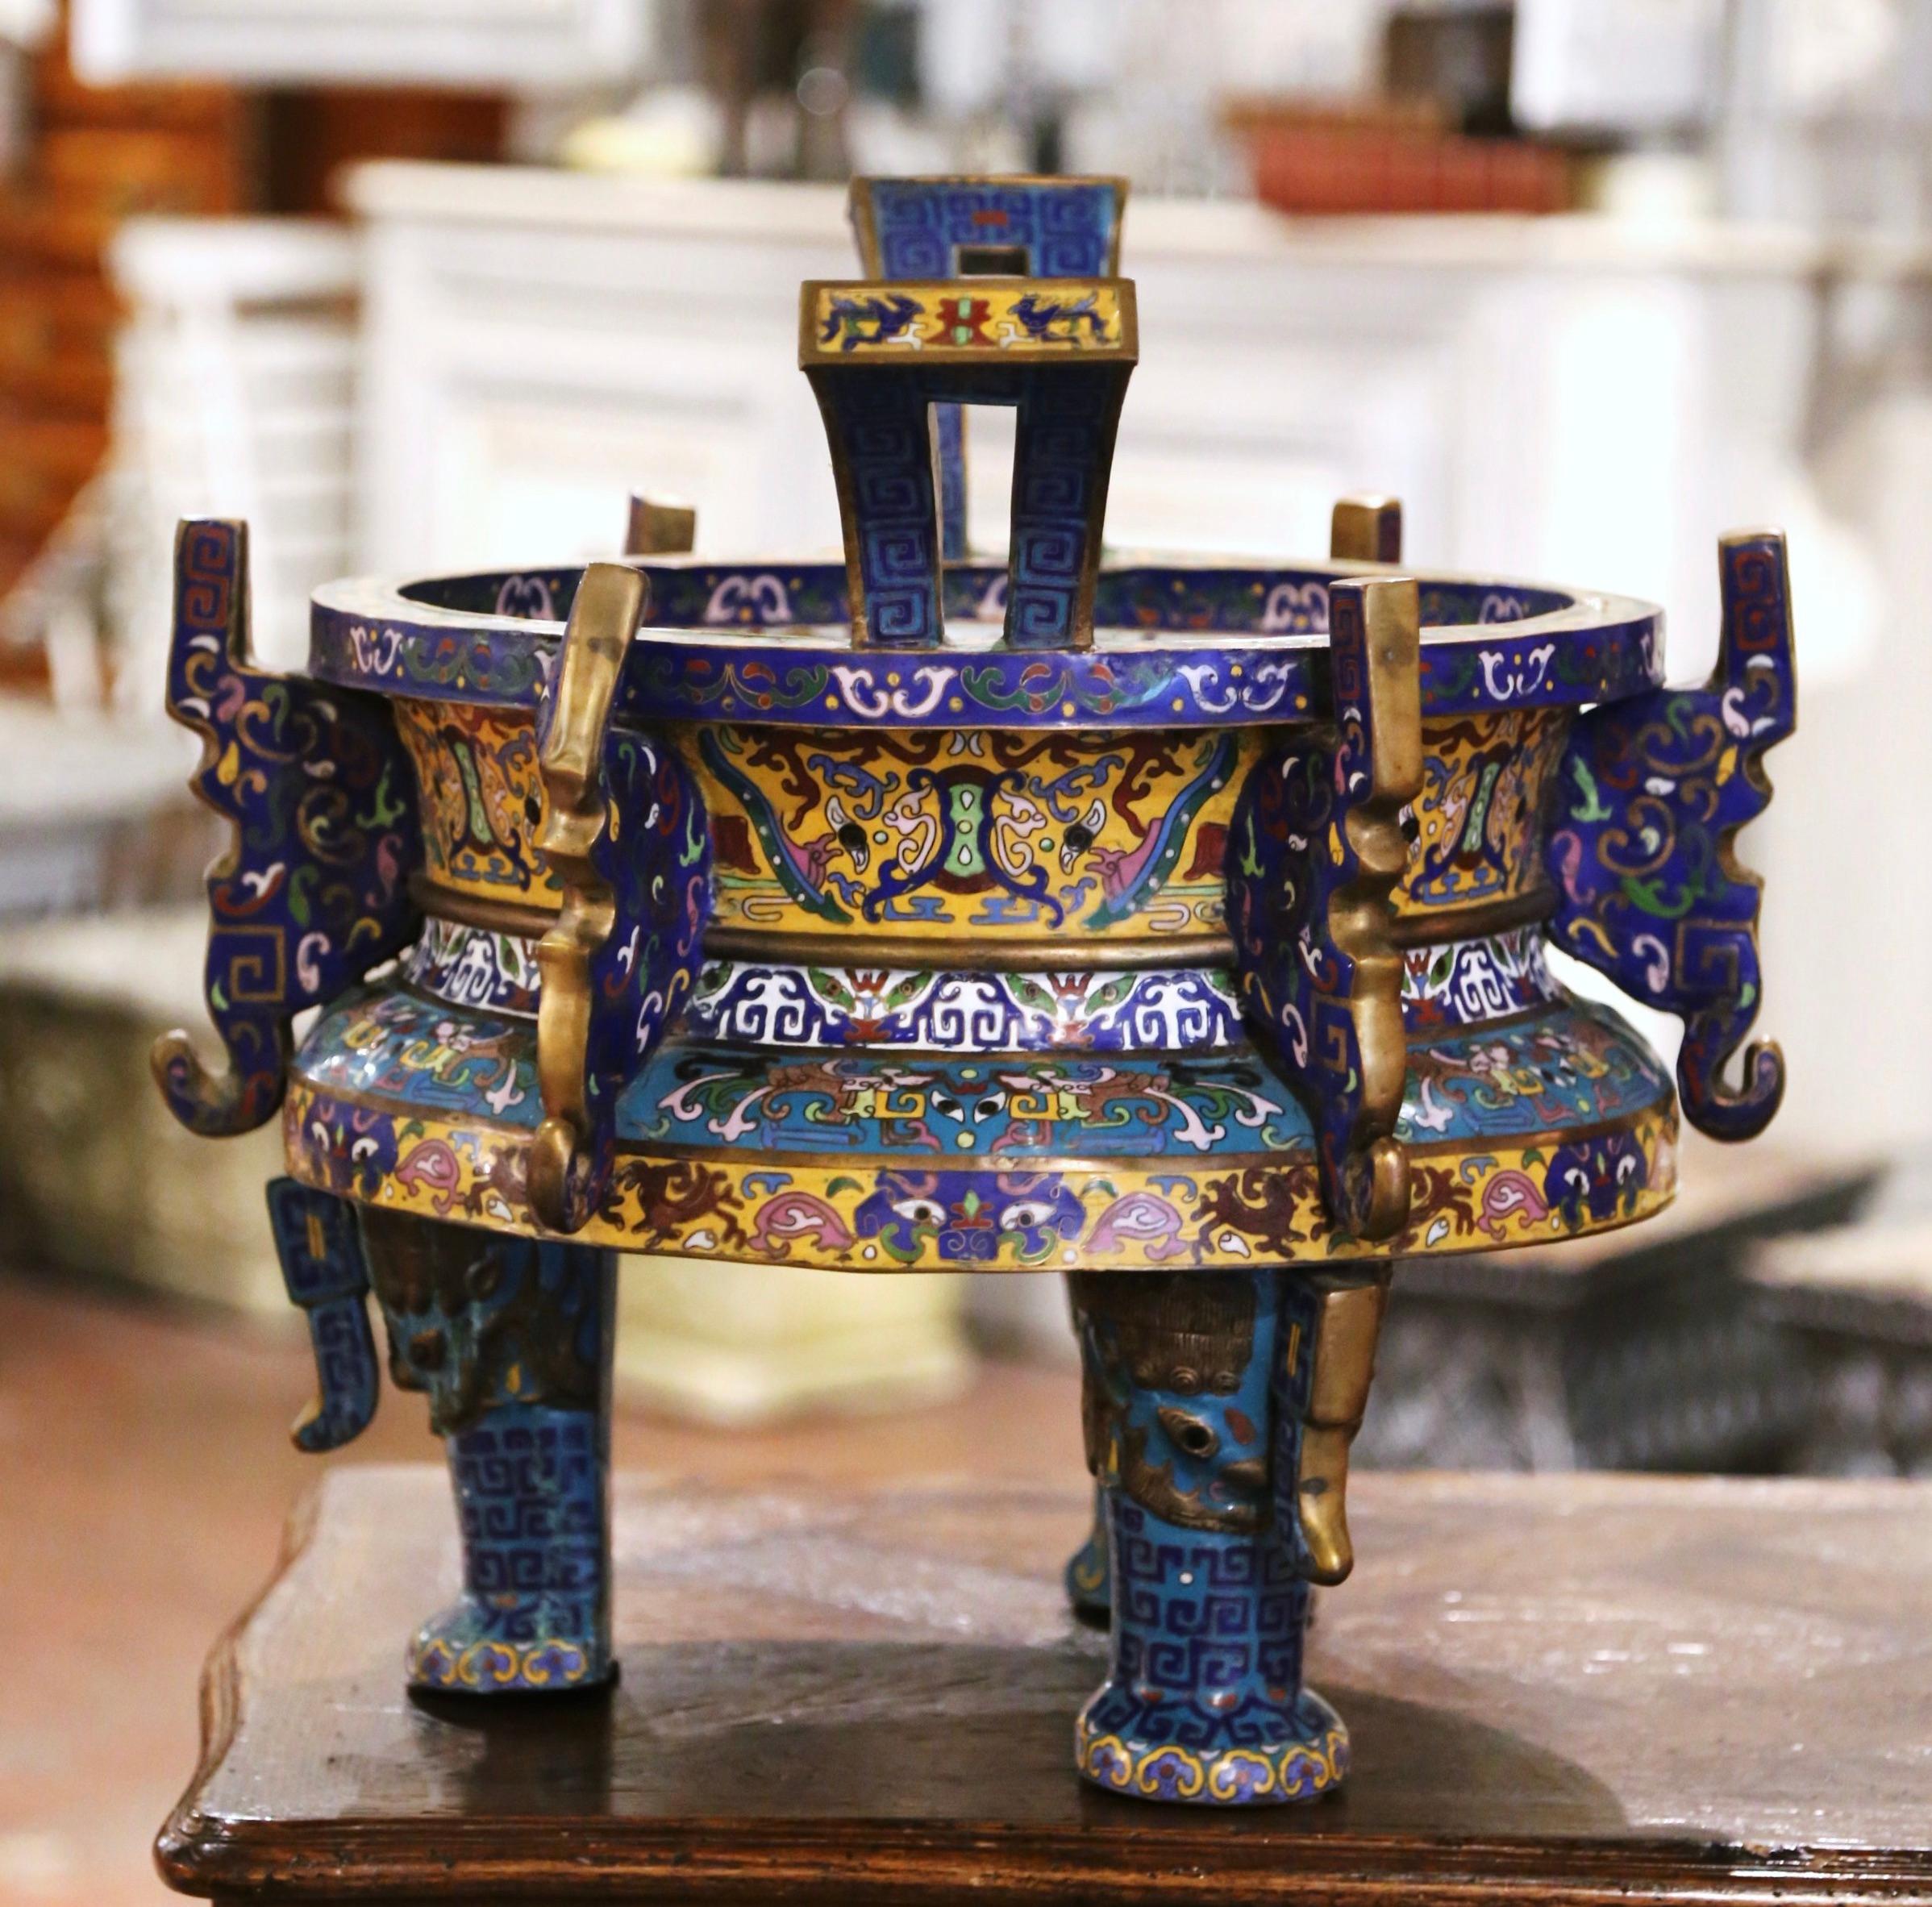 This colorful antique champlevé “planterette”, or cache pot, was crafted in China circa 1870 and features ornate and intricate cloisonne decor with vibrant and bold colors throughout the pot. Supporting the flowerpot are three elephants displaying